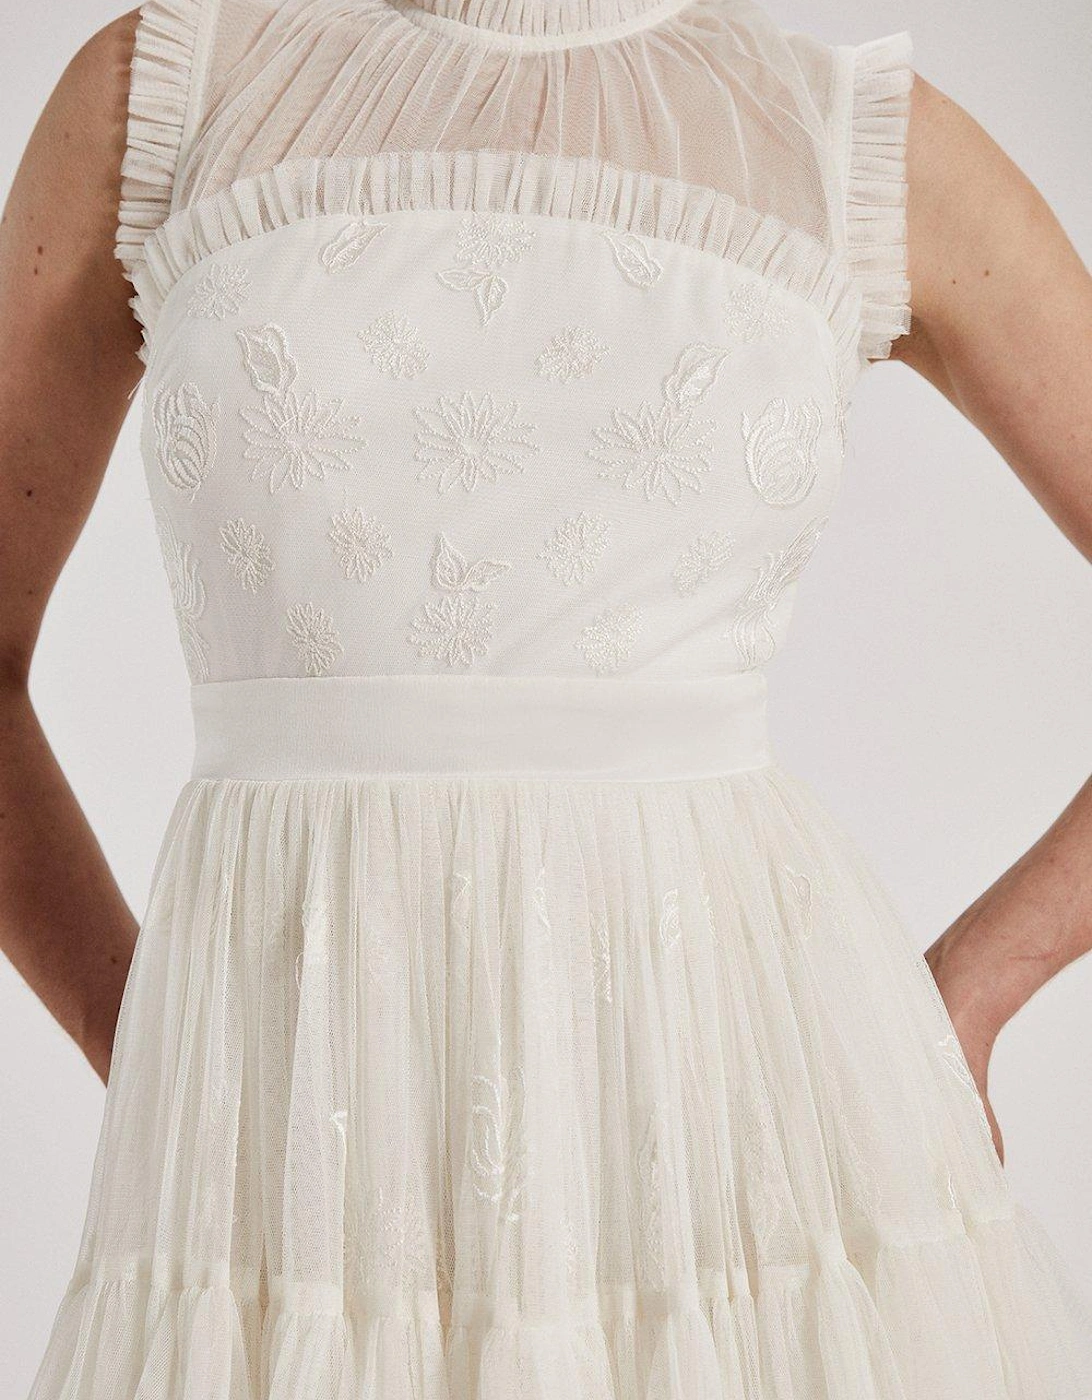 RSN Inspired Embroidered Mesh Dress